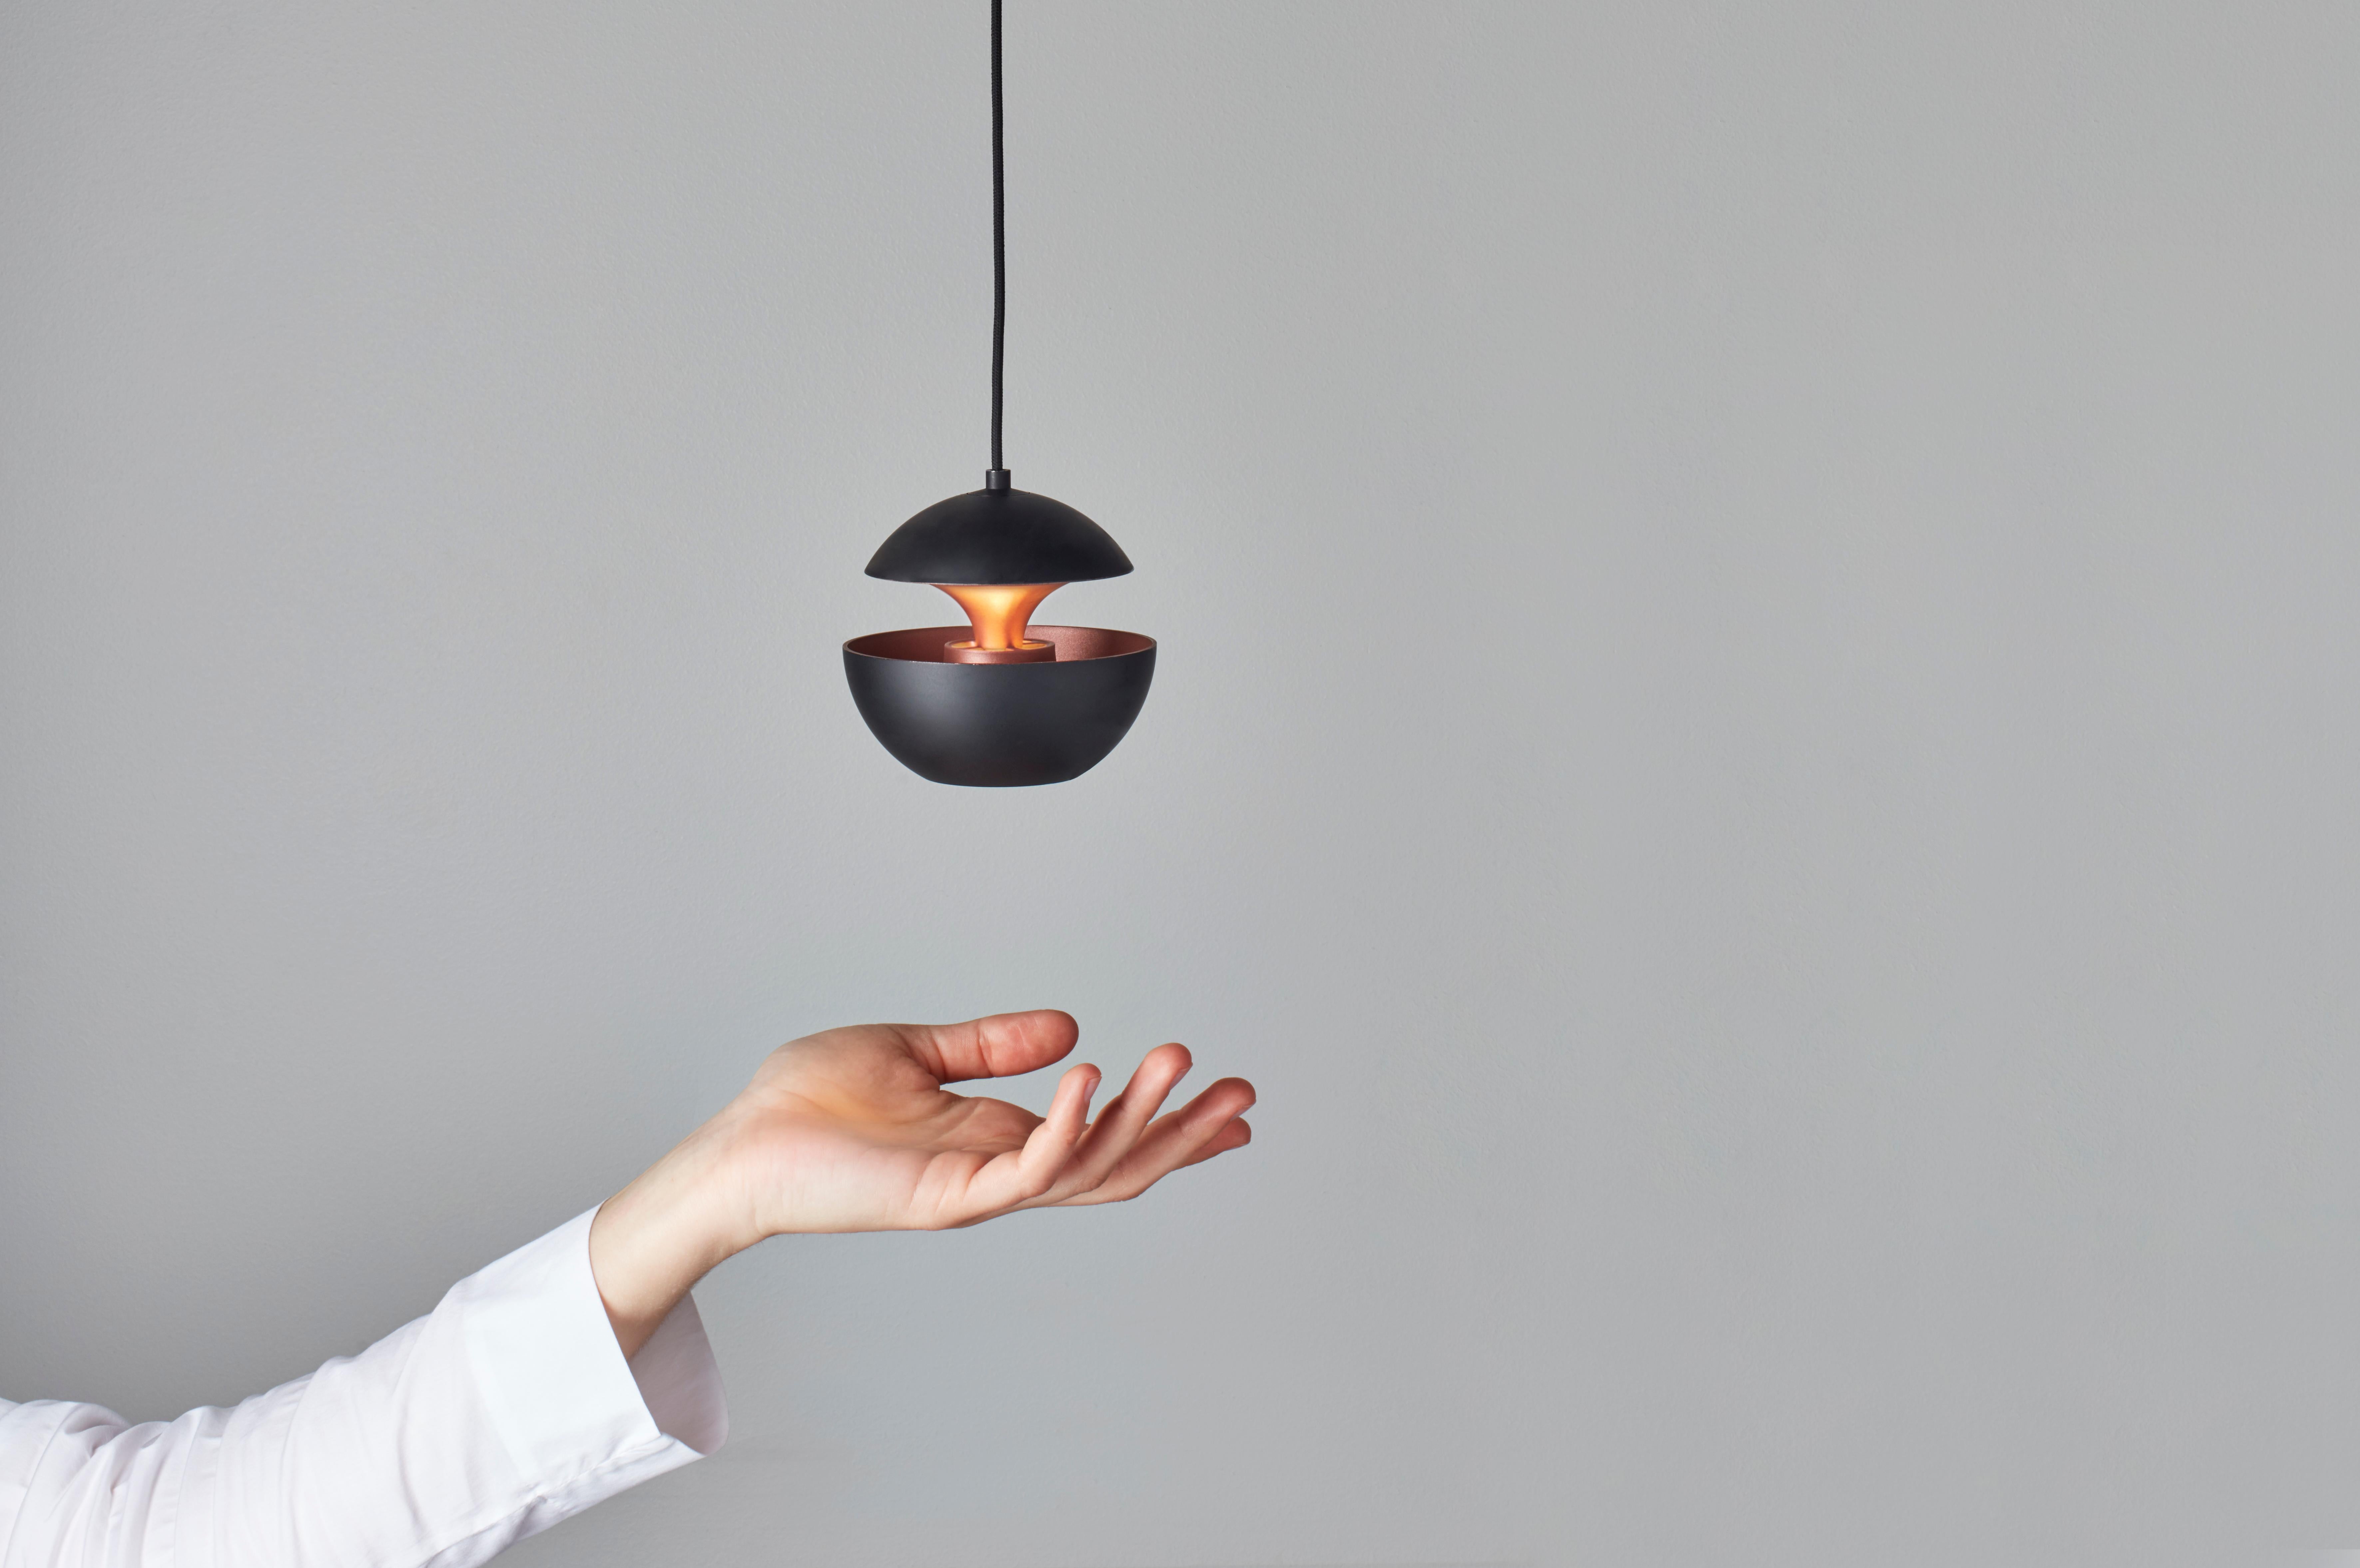 Here comes the sun mini black pendant lamp by Bertrand Balas
Dimensions: D 10 x H 10cm
Materials: Aluminum
Available in different sizes and colors

All our lamps can be wired according to each country. If sold to the USA it will be wired for